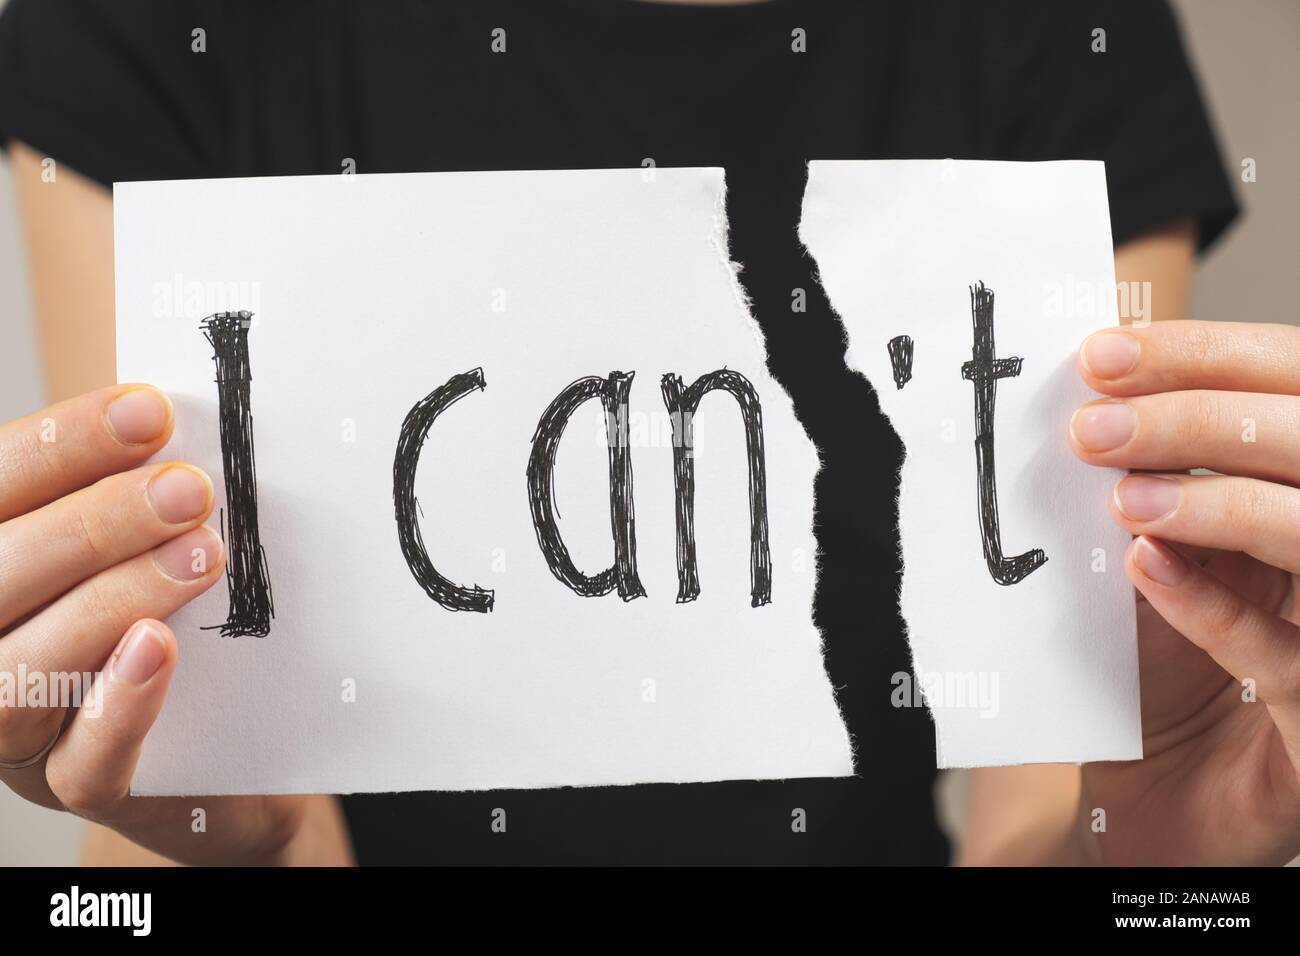 Hands tearing out negation of the 'i can not' sign. Motivational concept of believing in yourself and overriding problems and emotional difficulties Stock Photo